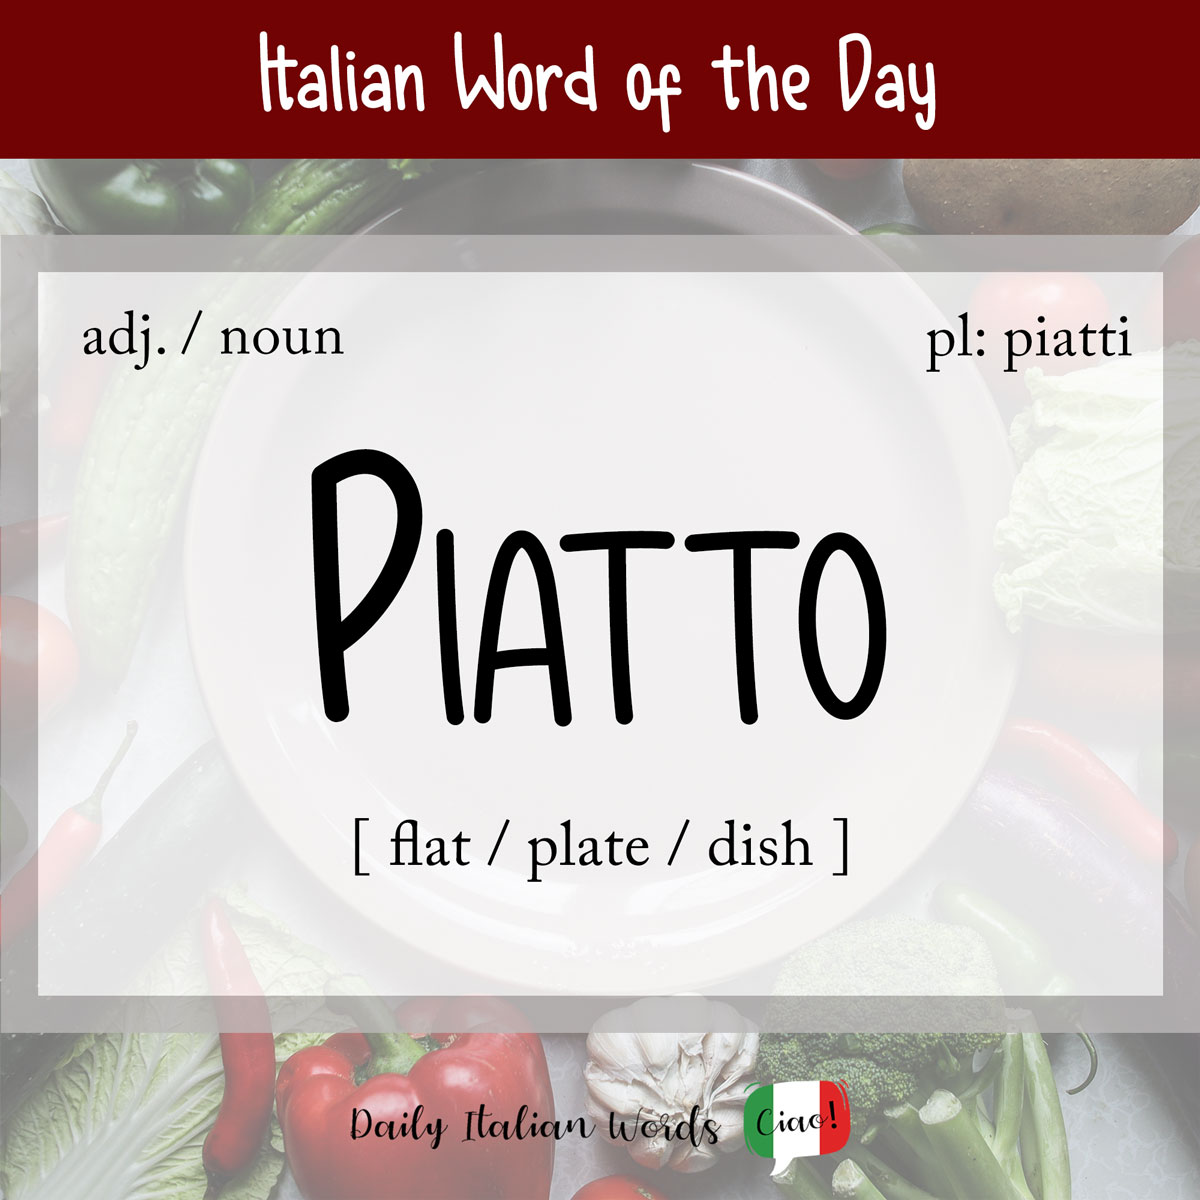 Italian word of the day: Piatto (flat/plate/plate)